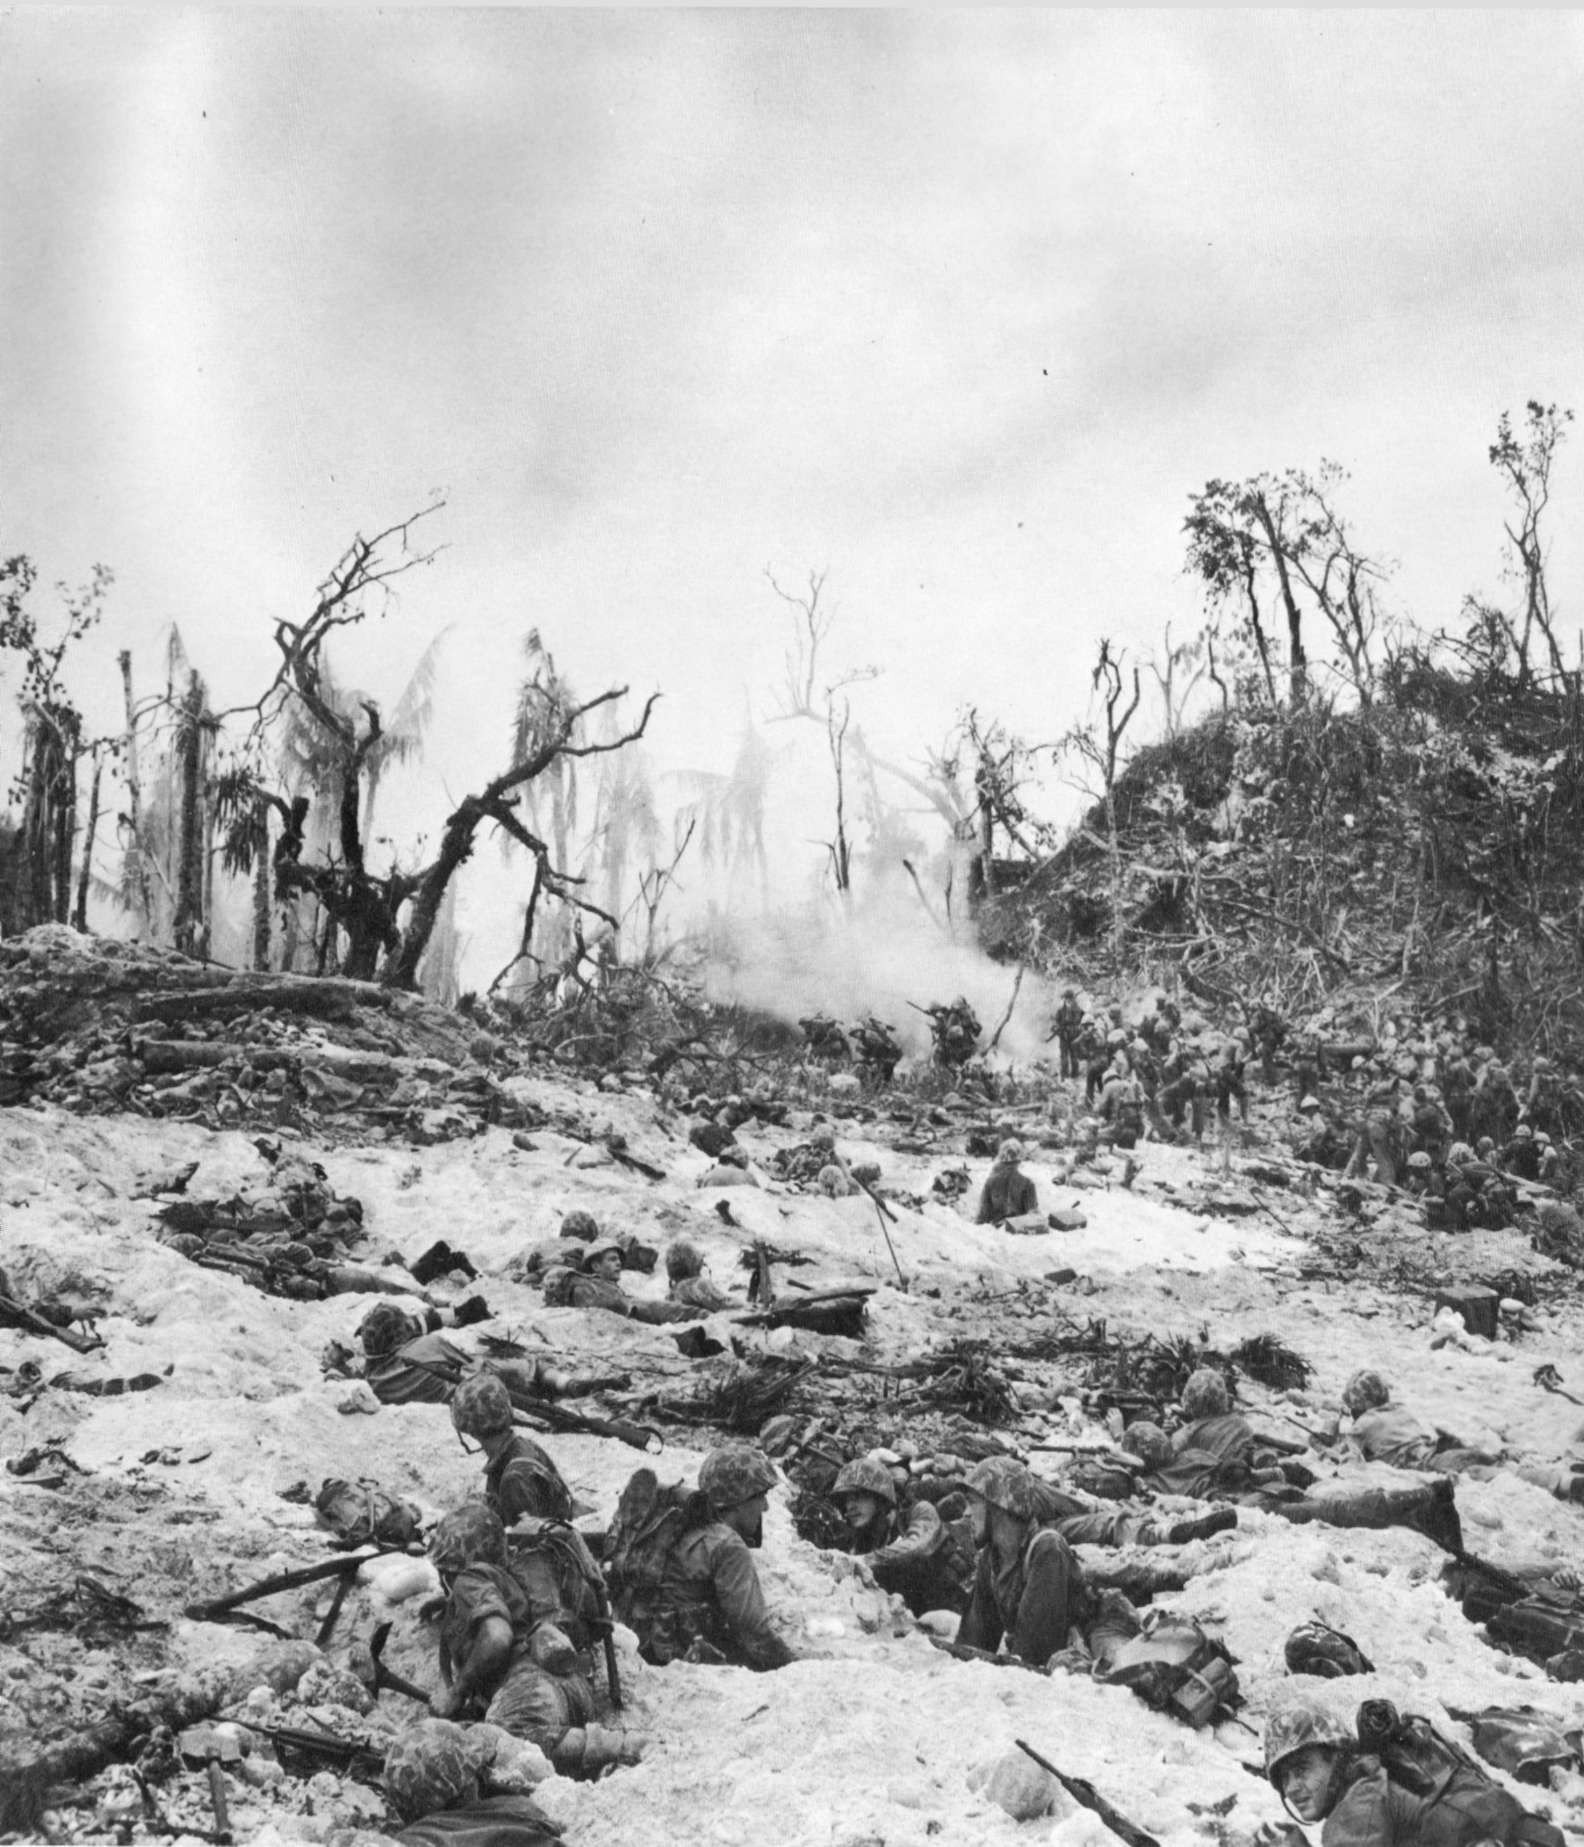 Men of the US 1st Marine Division fighting just beyond White Beach, Peleliu, 15 Sep 1944, photo 1 of 2